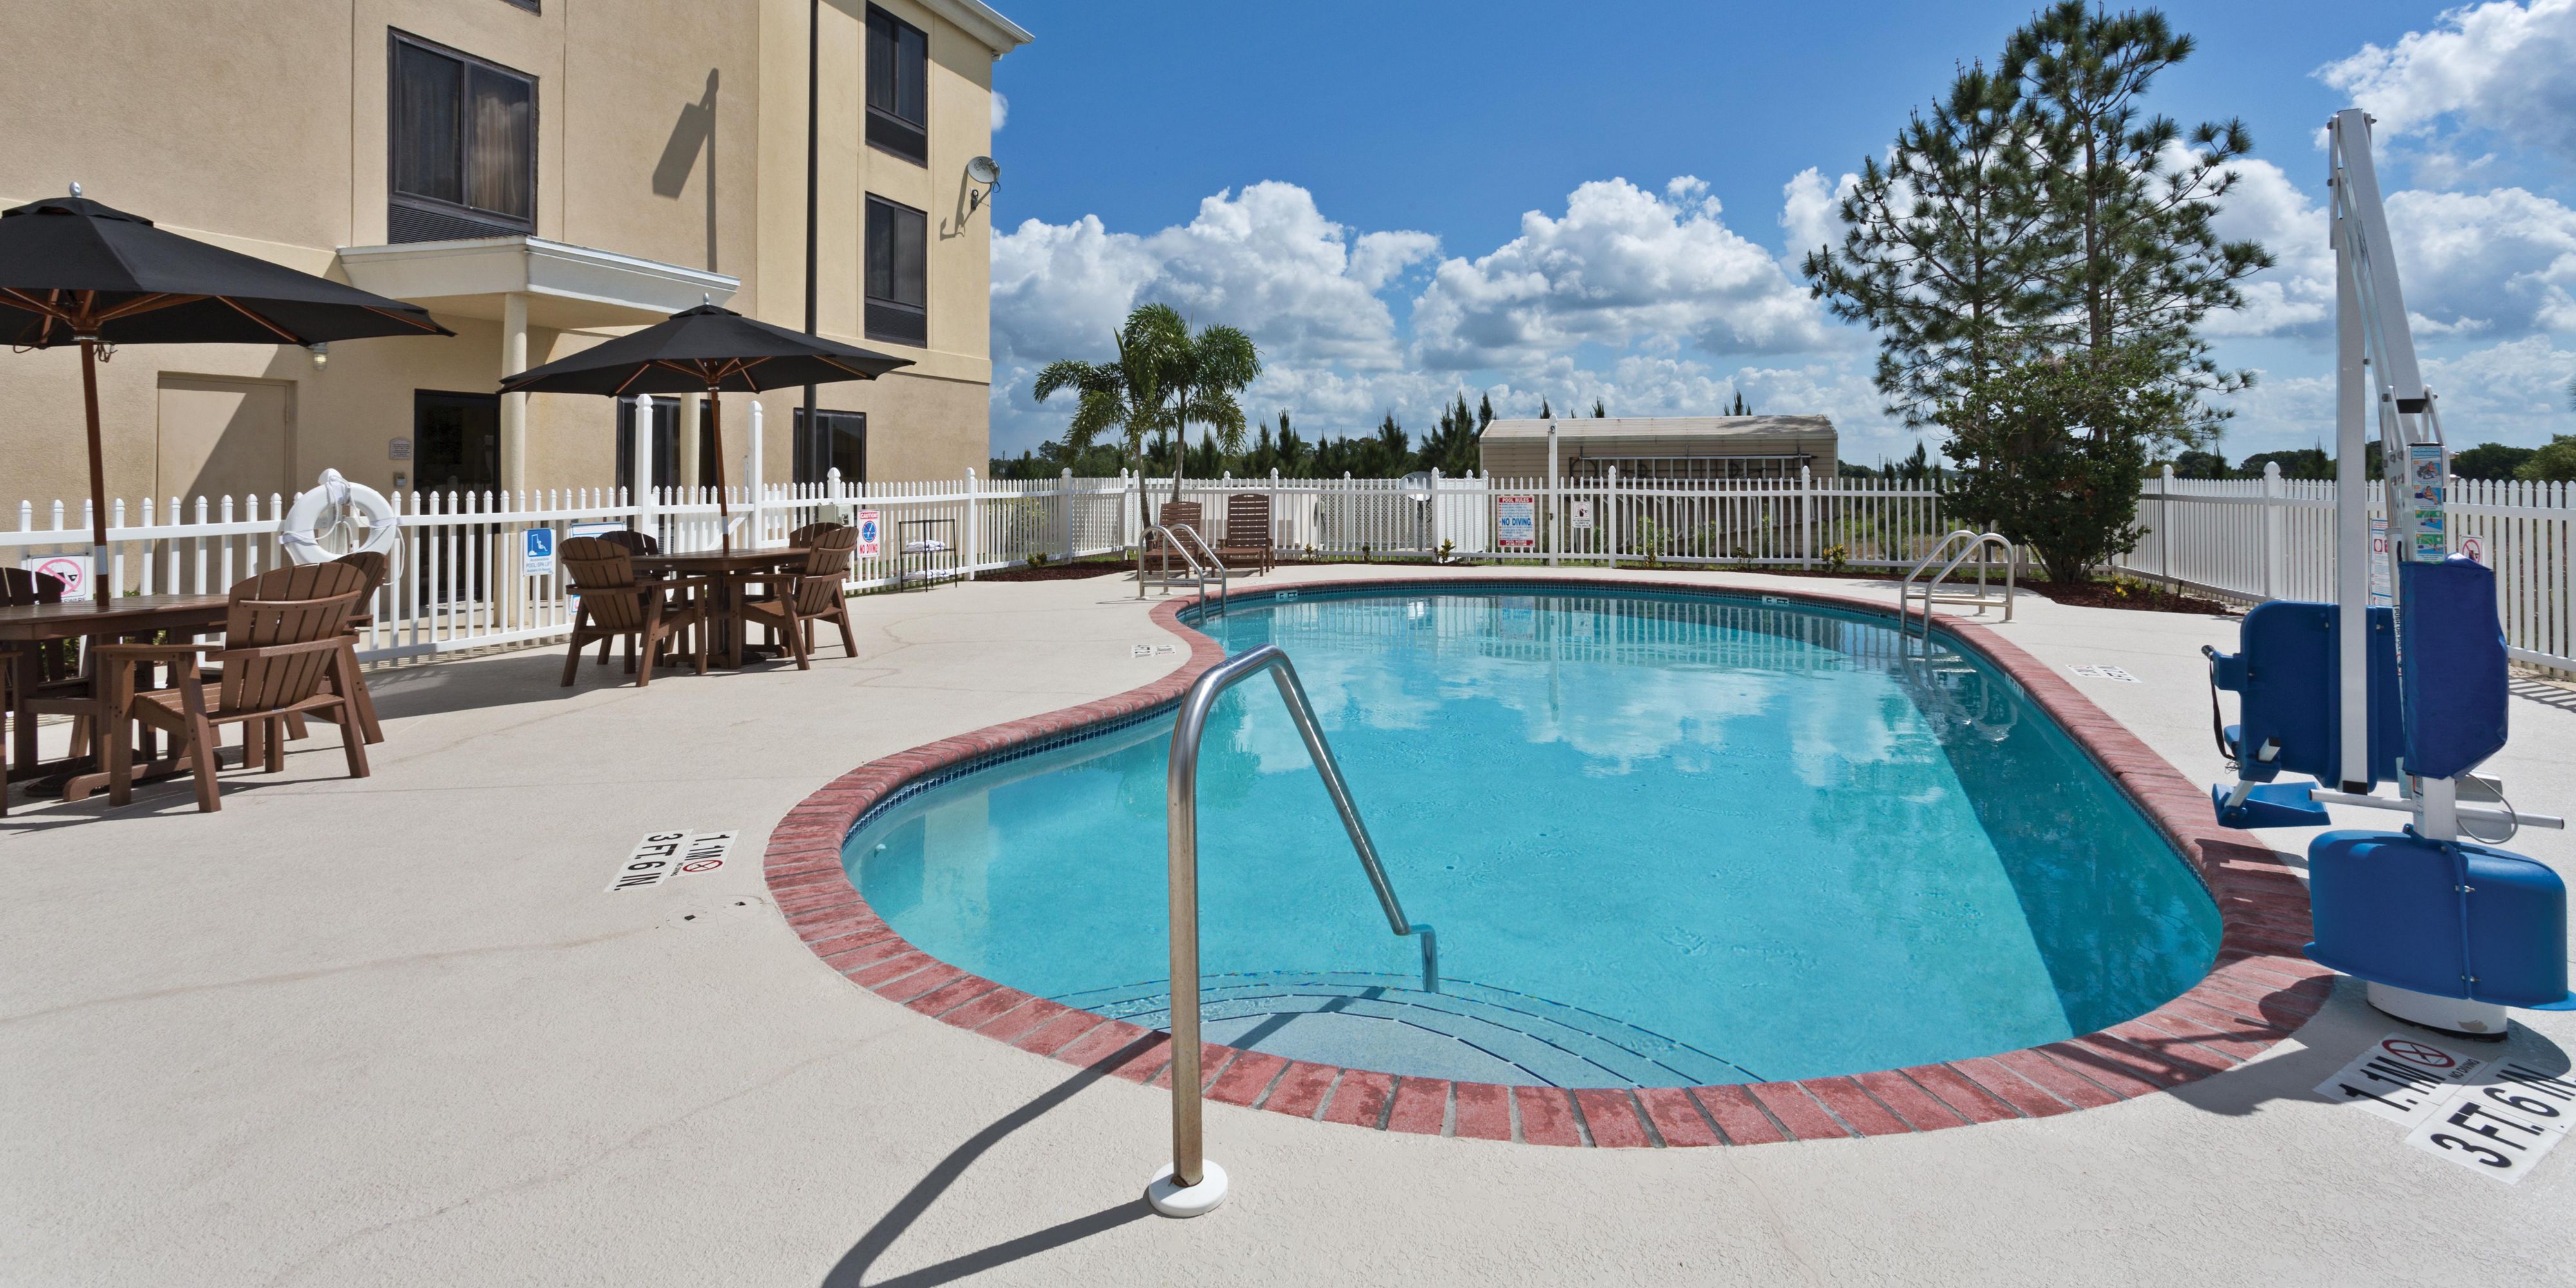 Enjoy relaxing in our heated outdoor pool after work or play.  